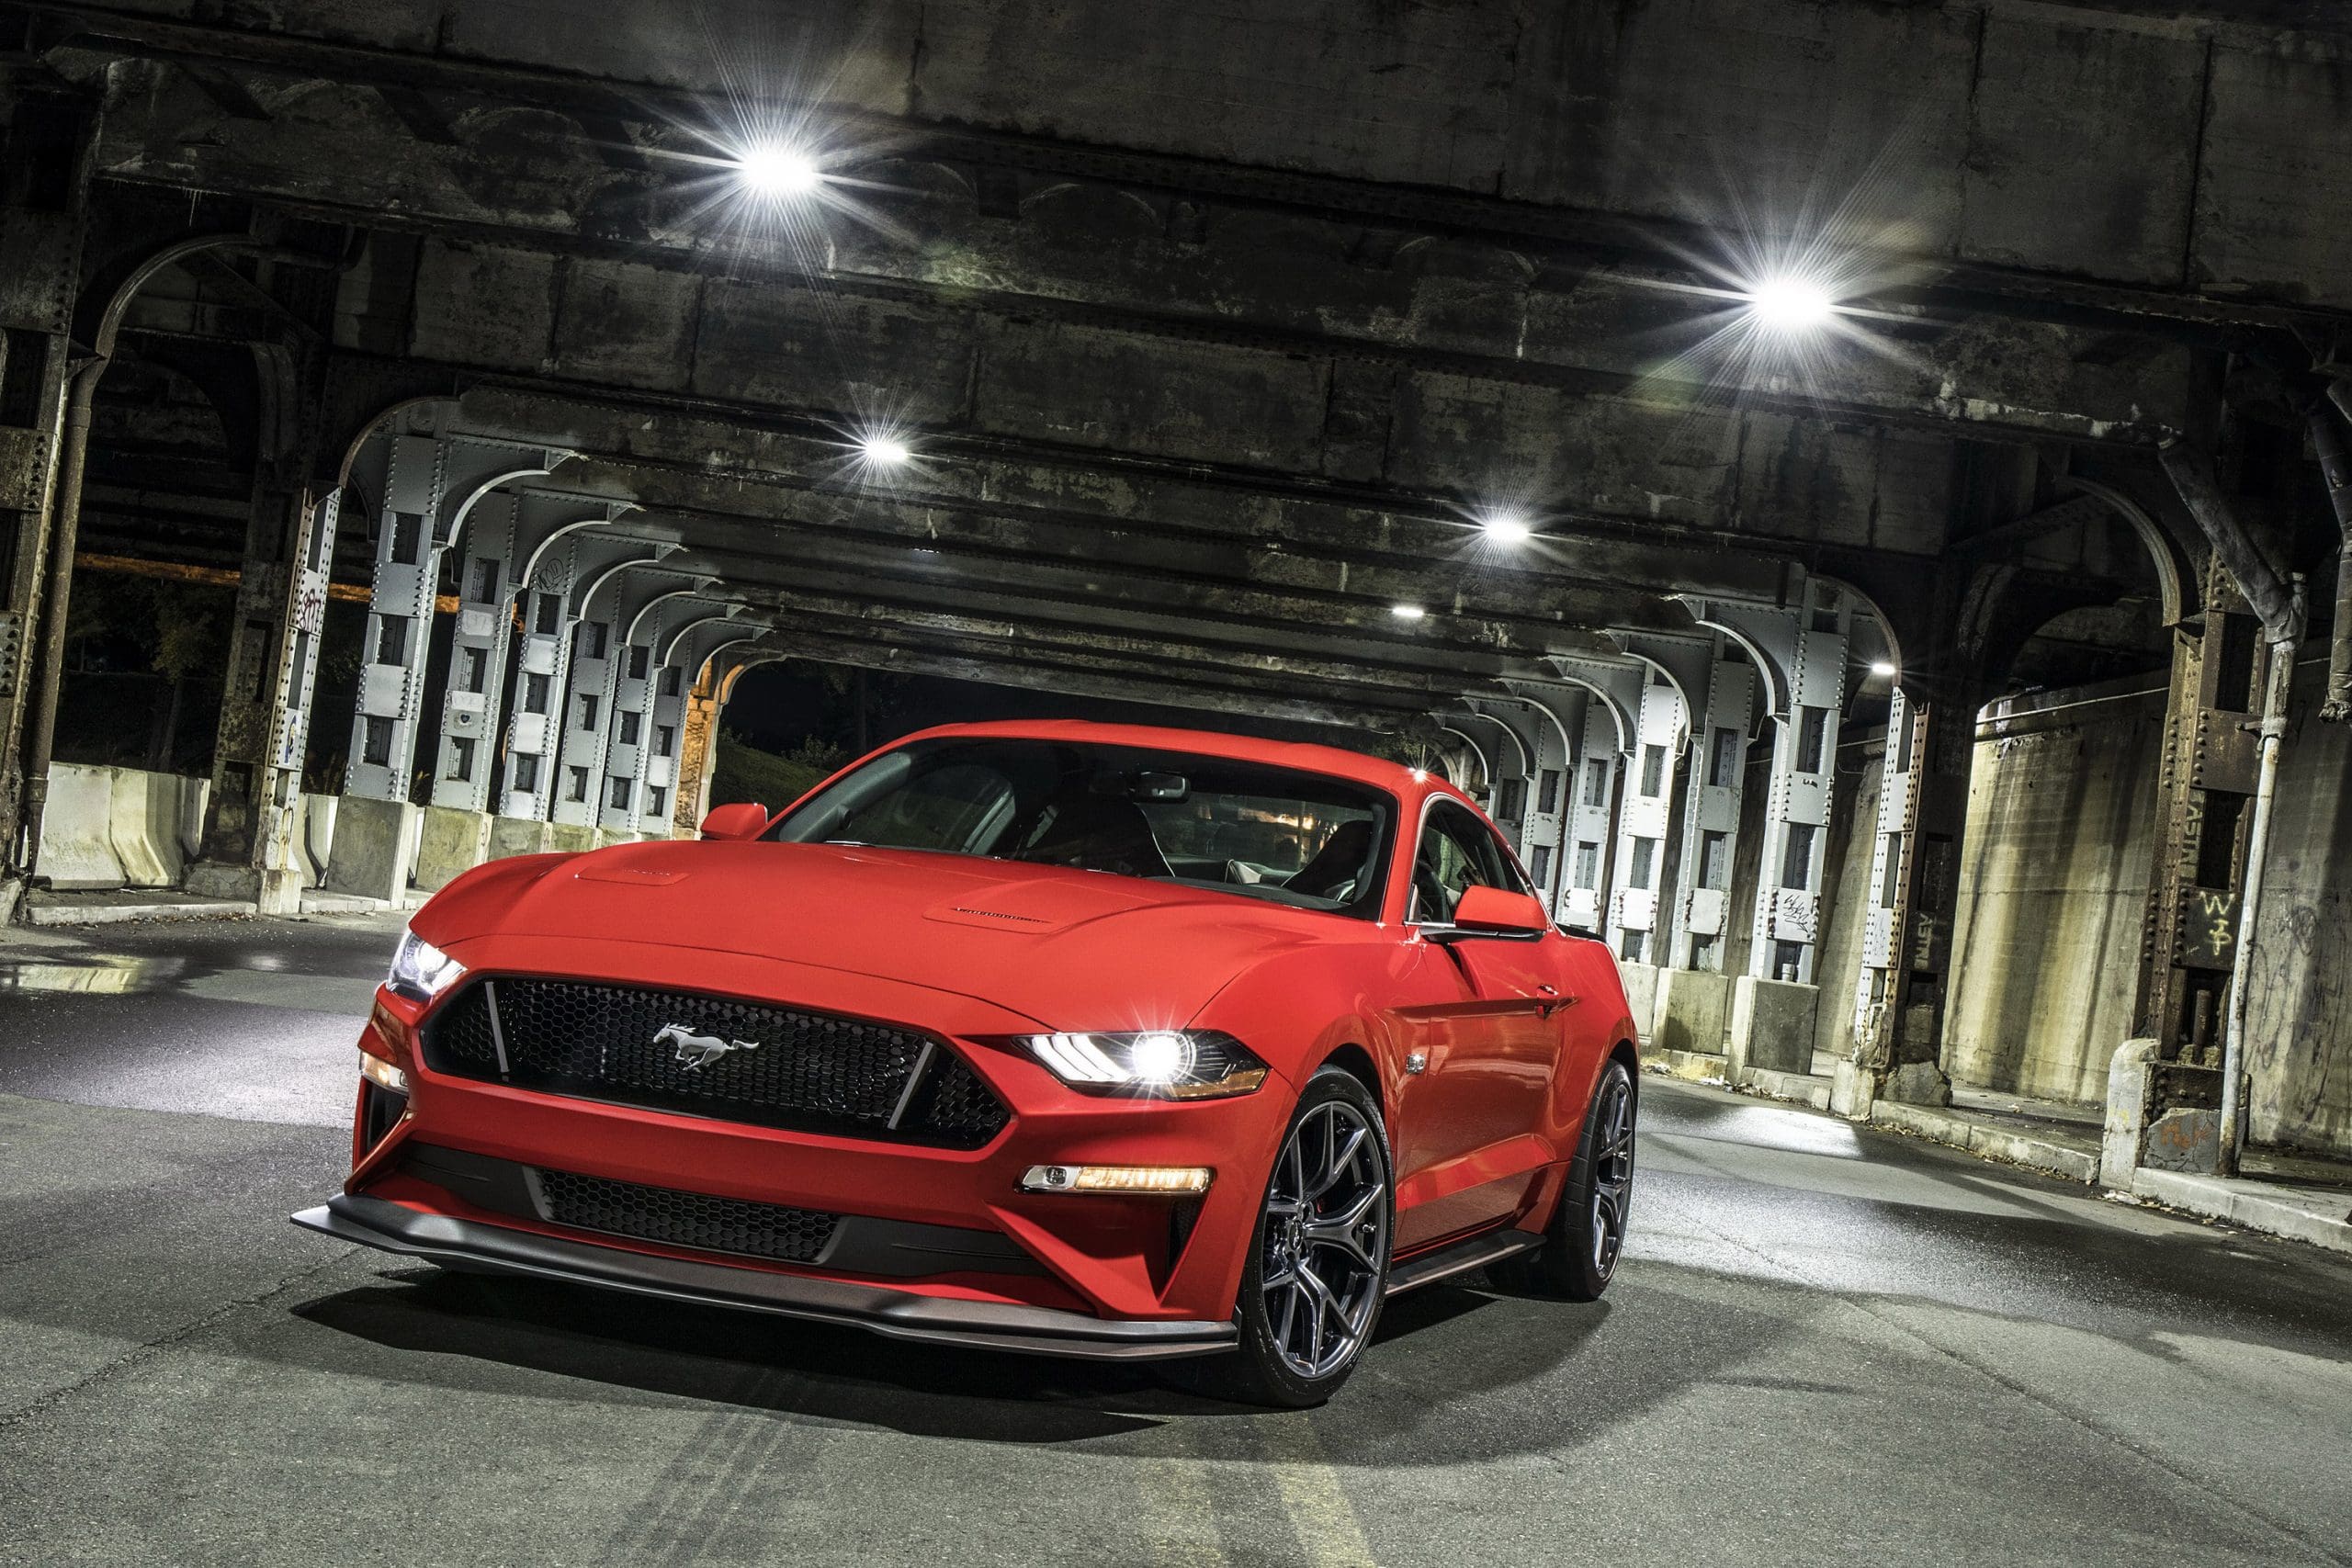 Mustang Of The Day: 2018 Ford Mustang GT Performance Pack Level 2